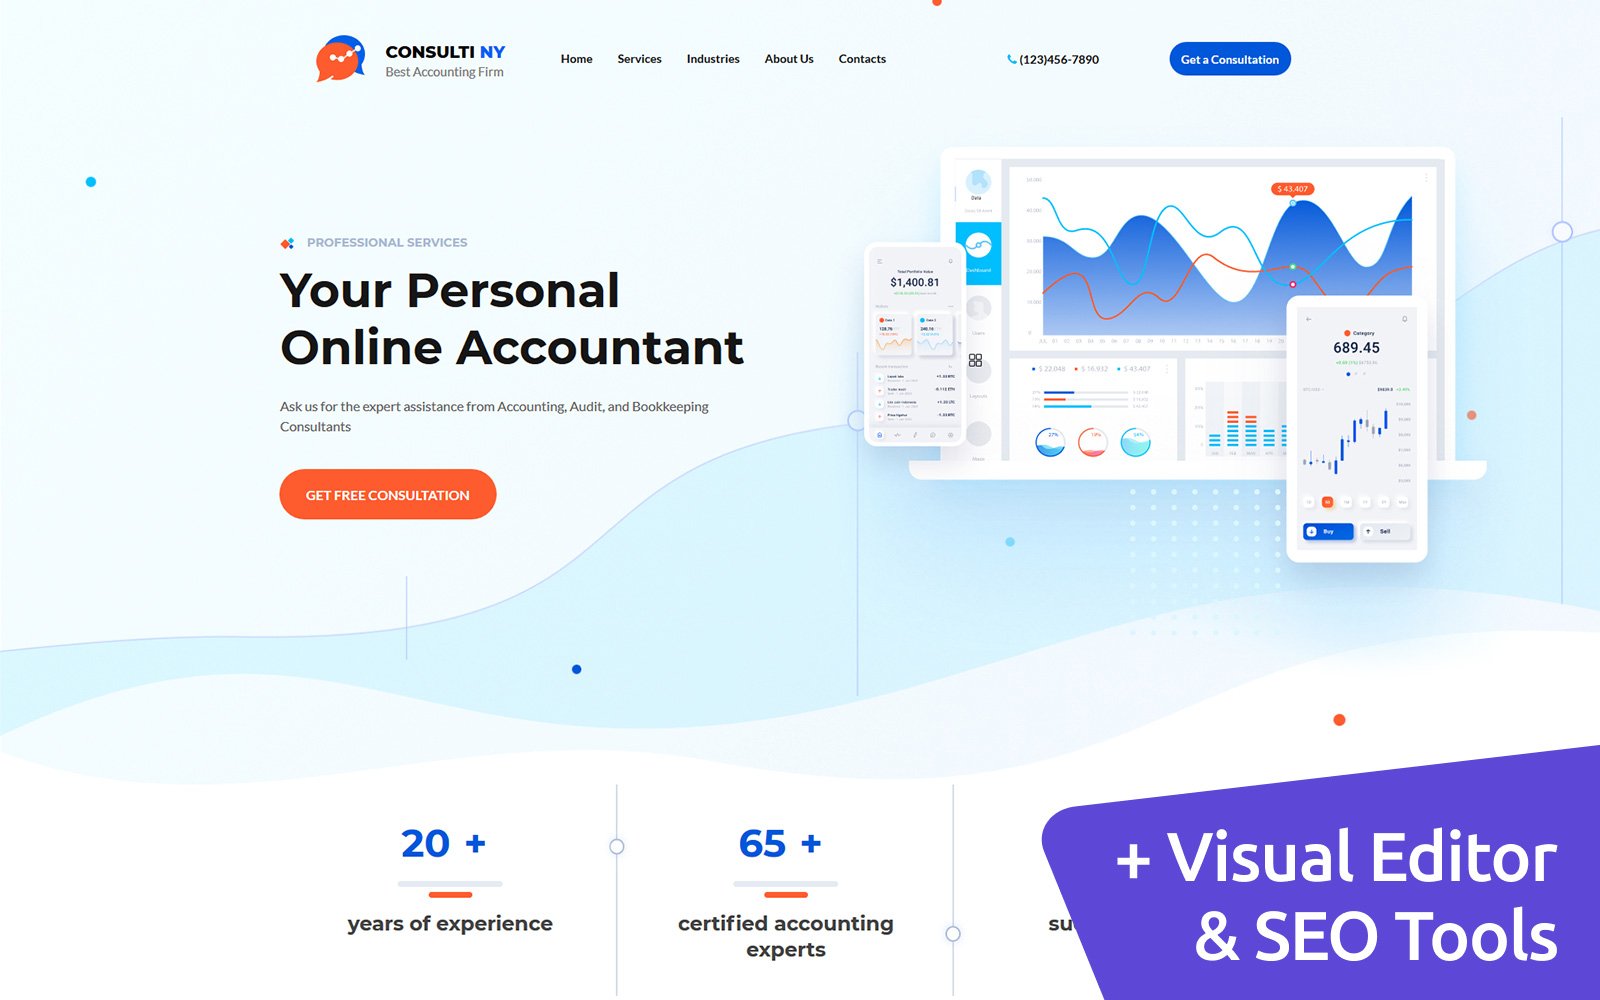 Consulti NY - Accounting Firm MotoCMS Landing Page Template